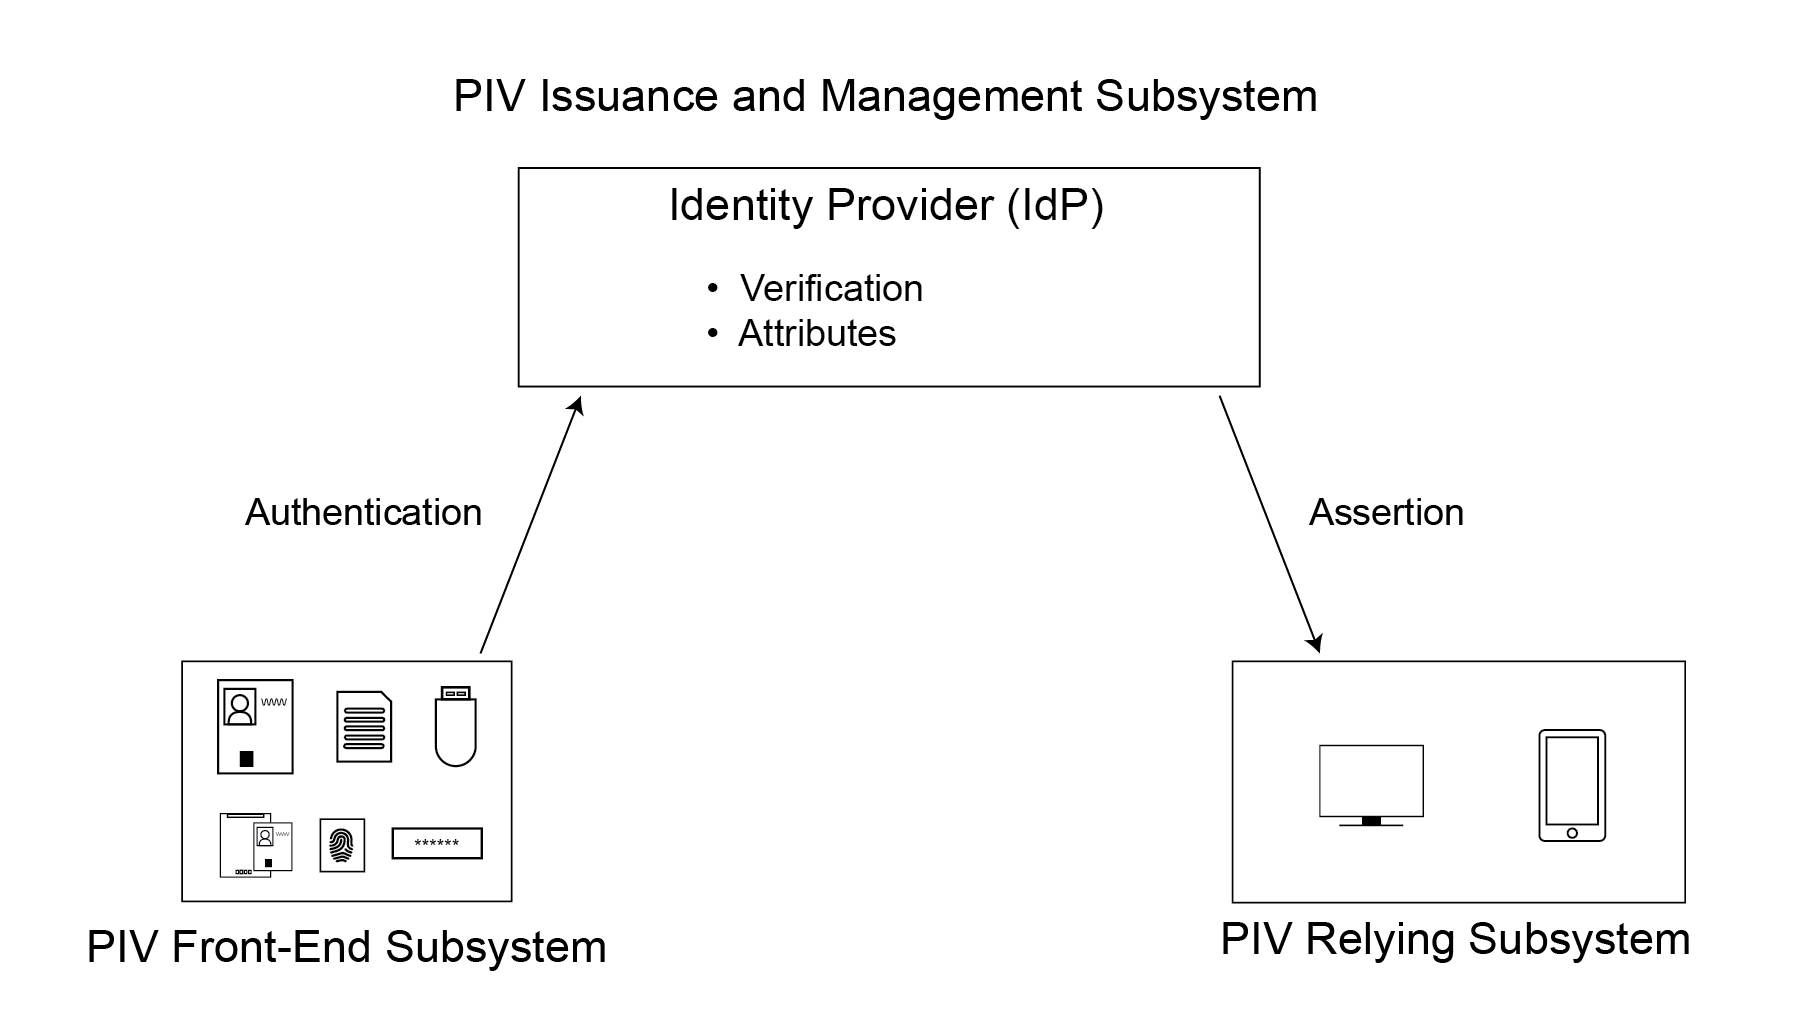 Diagram of connections between components in a federated system using PIV credentials.